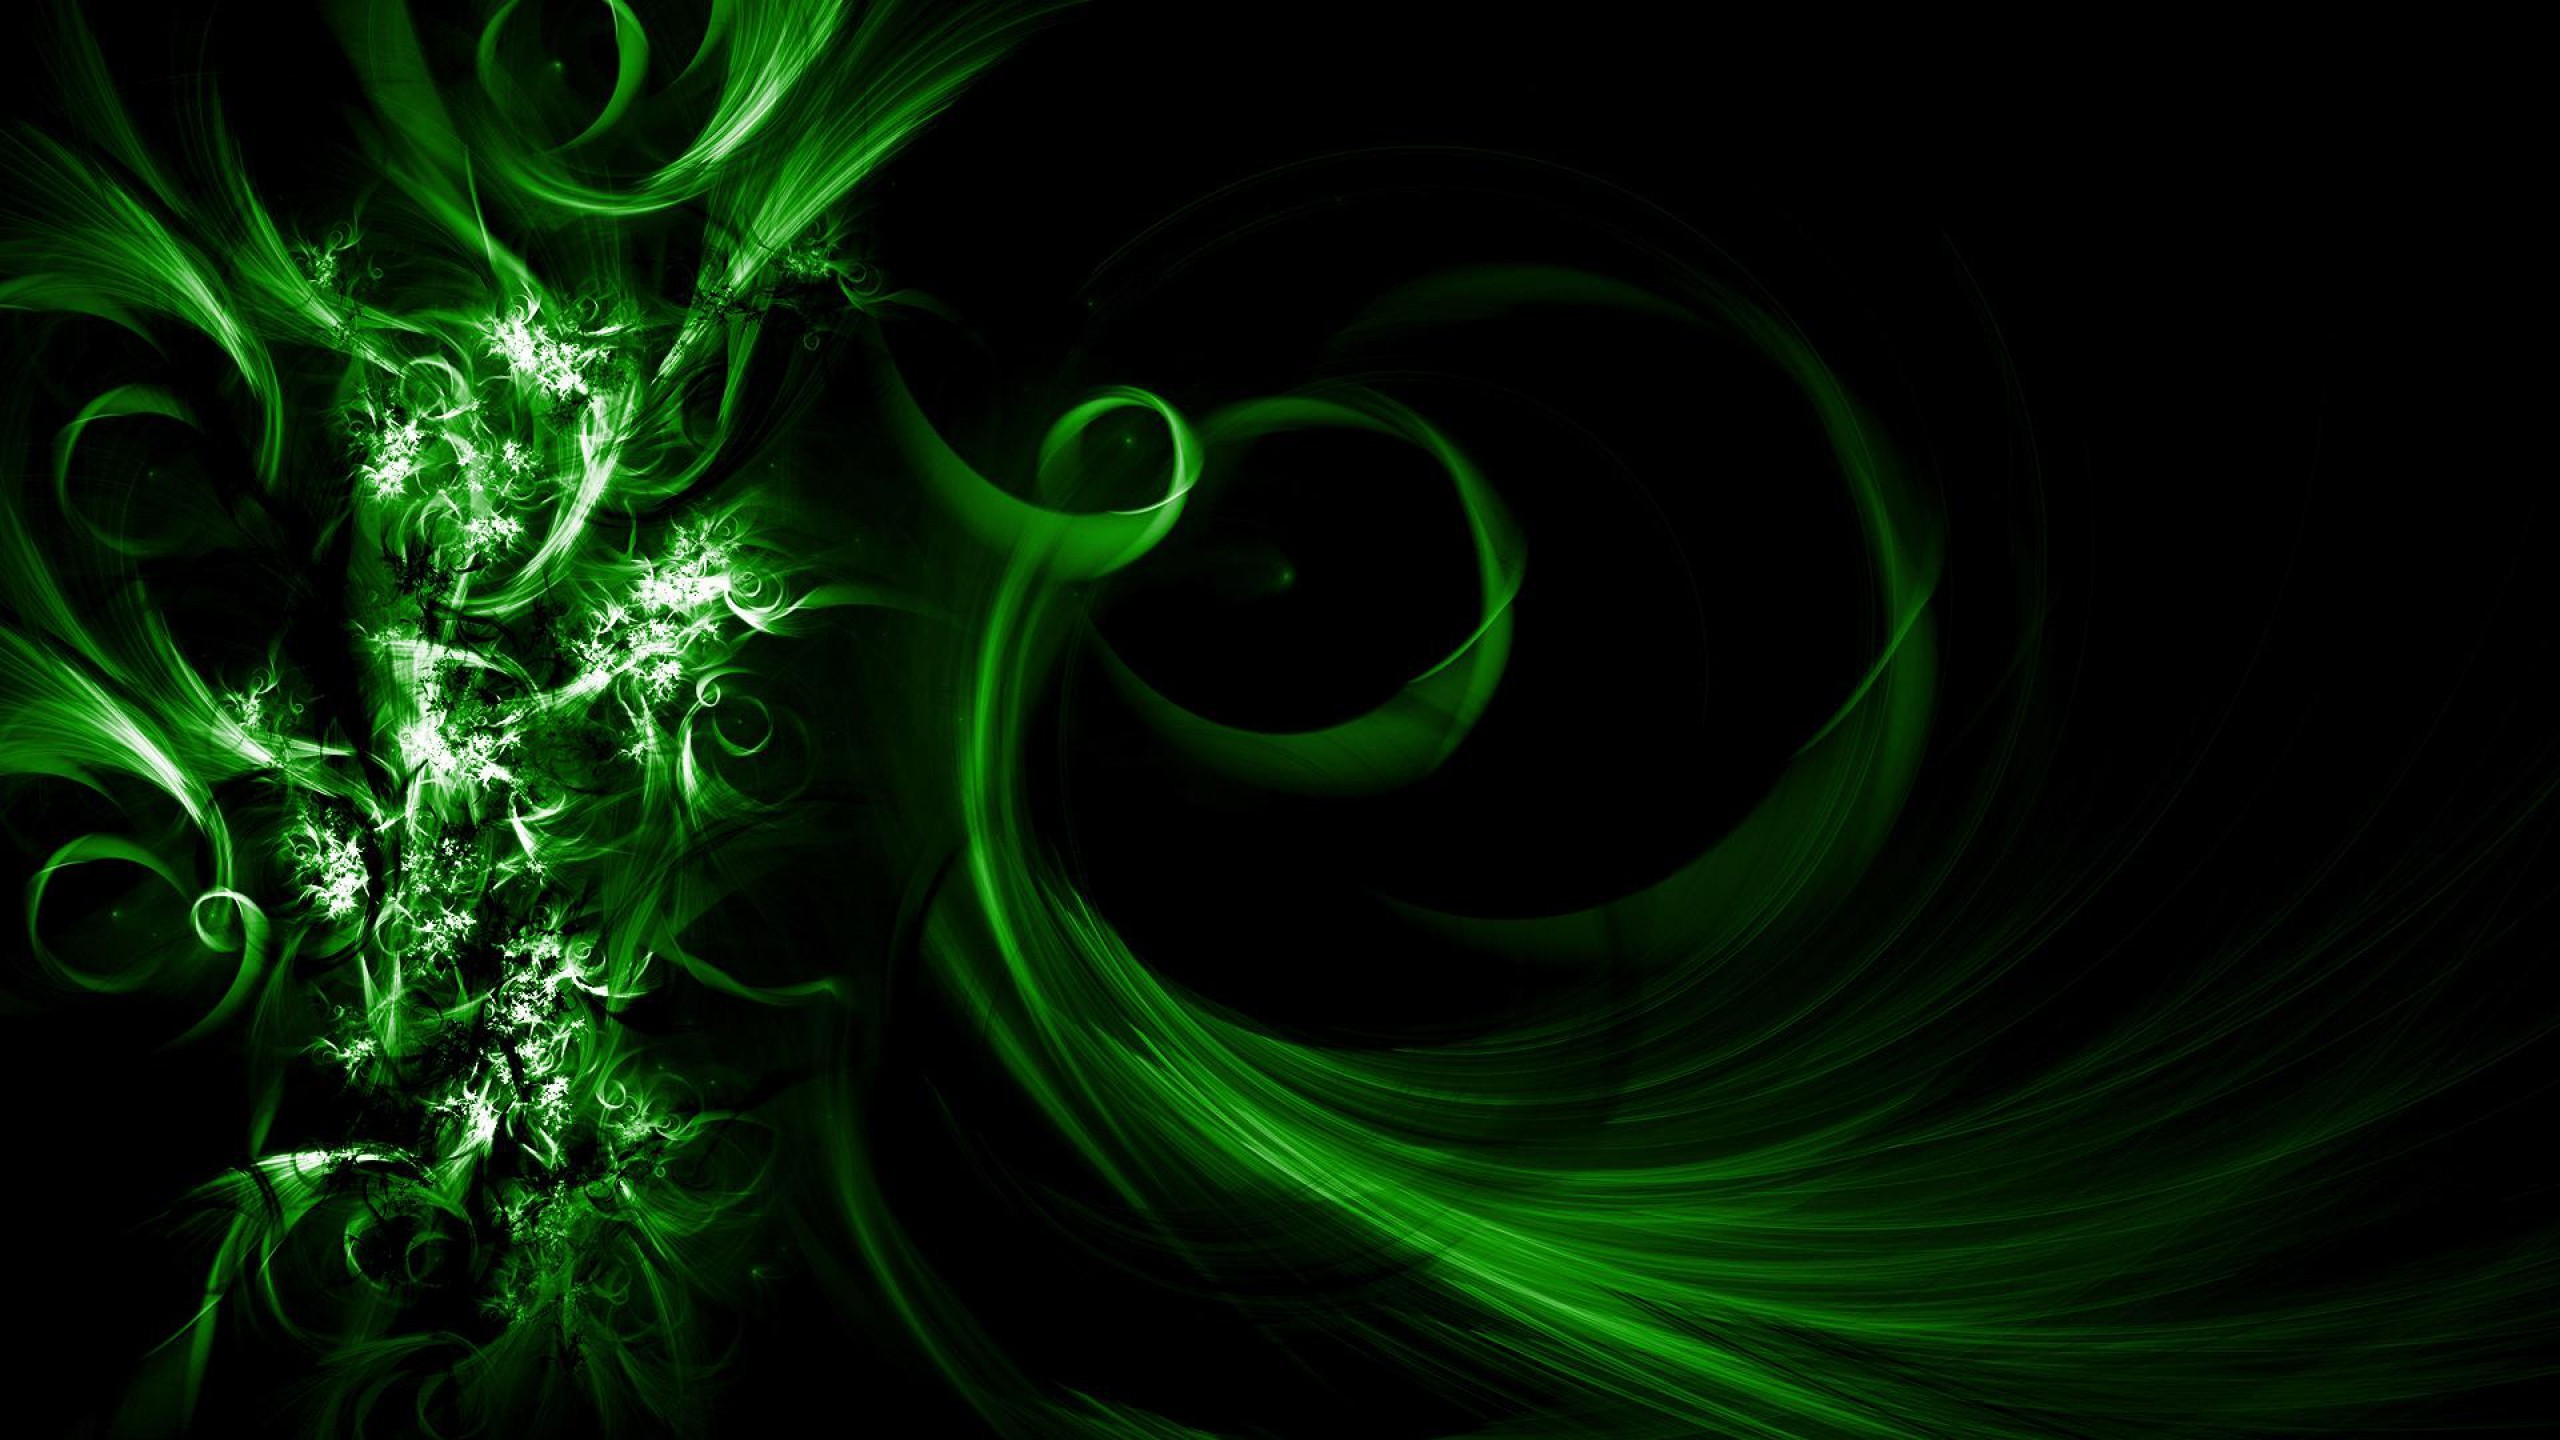 2560x1440 Download Cool Abstract Wallpapers HD Pictures In High Definition Or